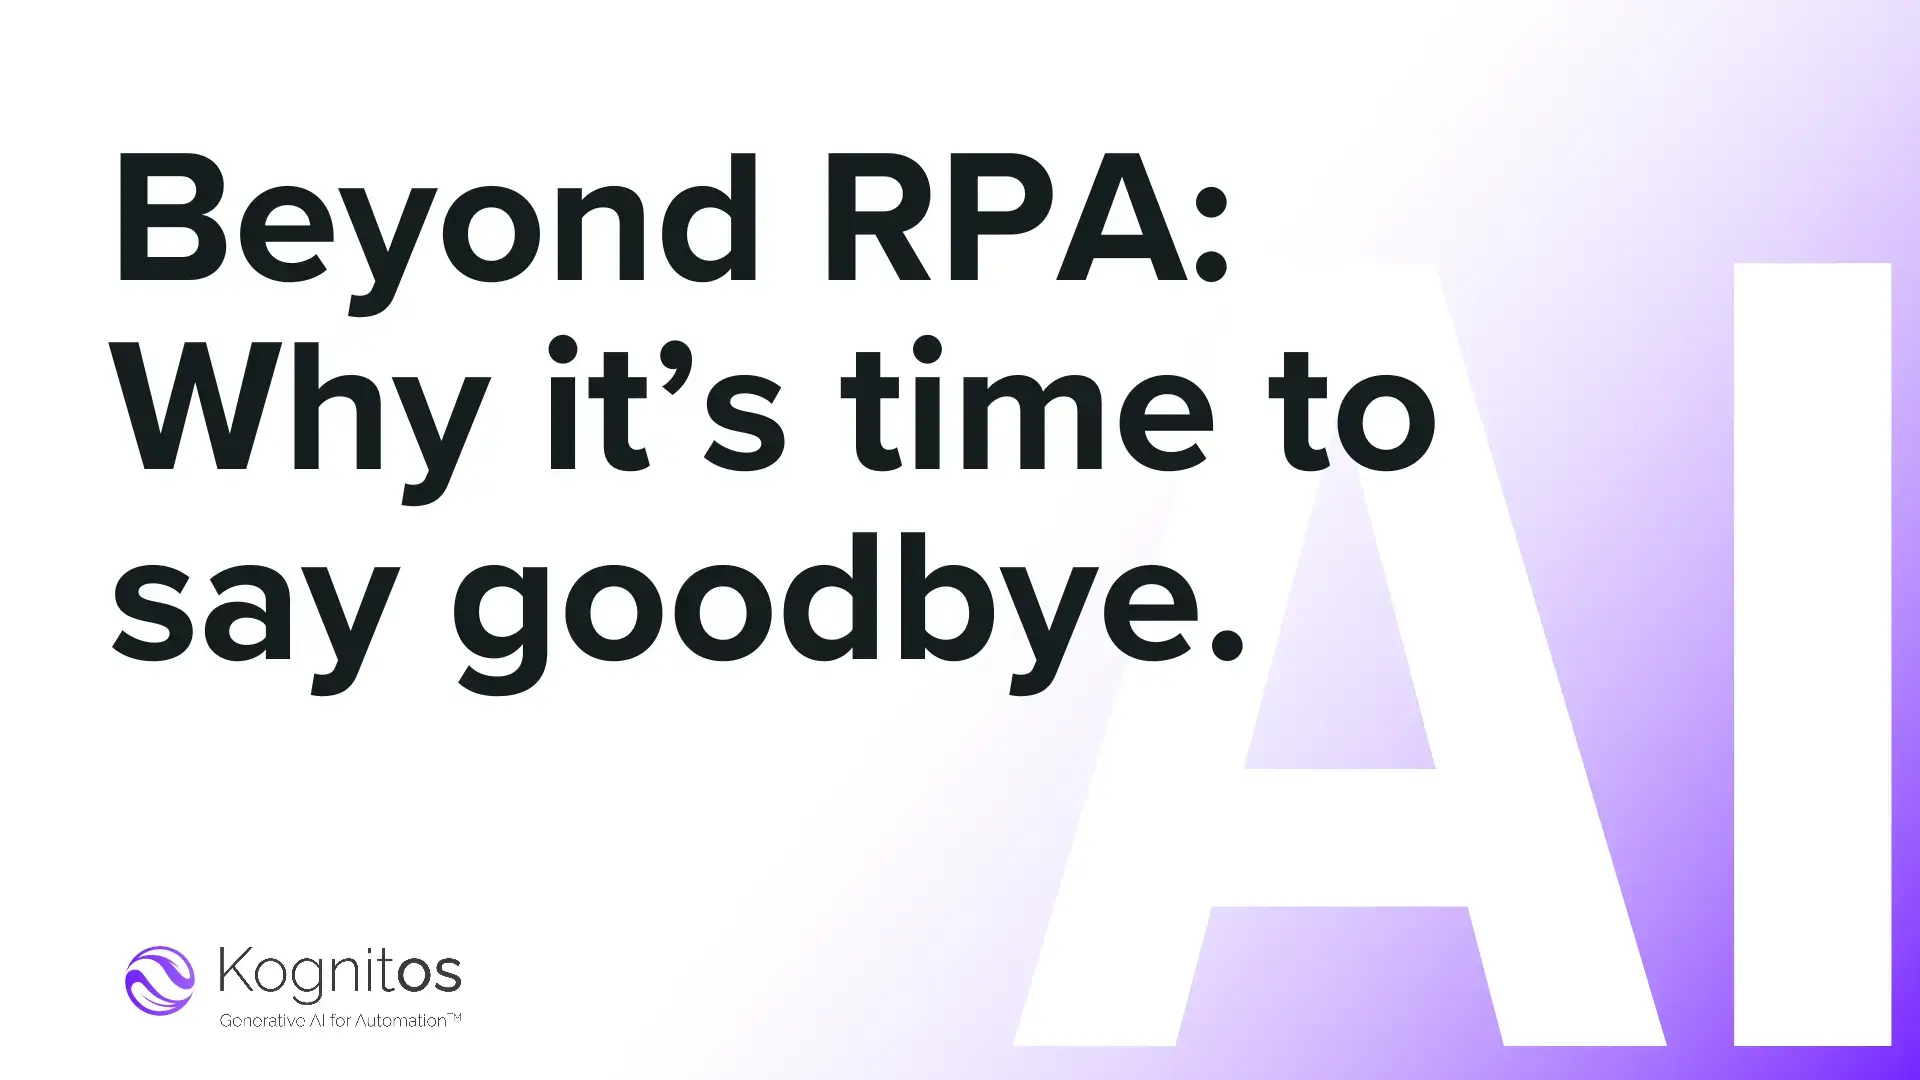 Beyond RPA: Why it’s time to say goodbye